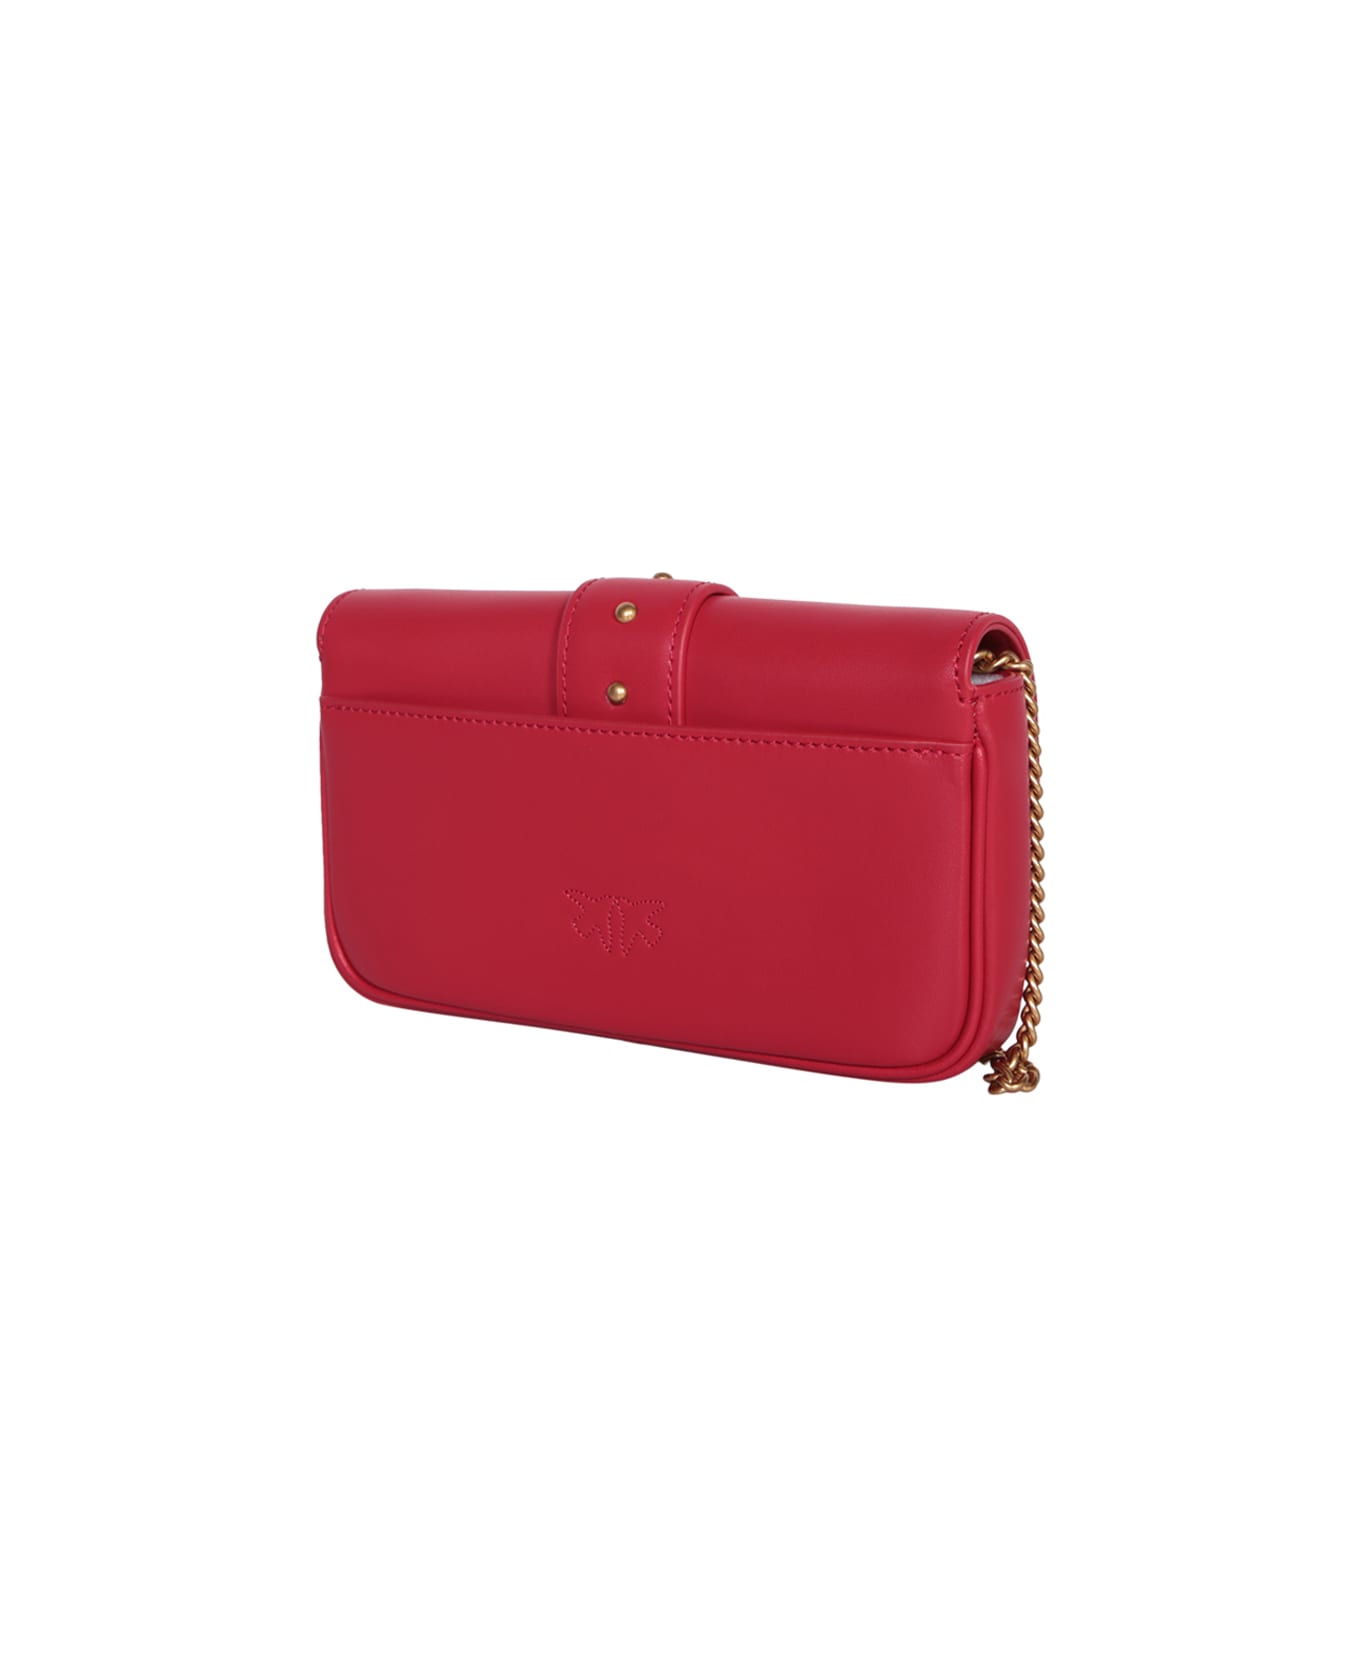 Pinko Love One Pocket Red Bag - Red